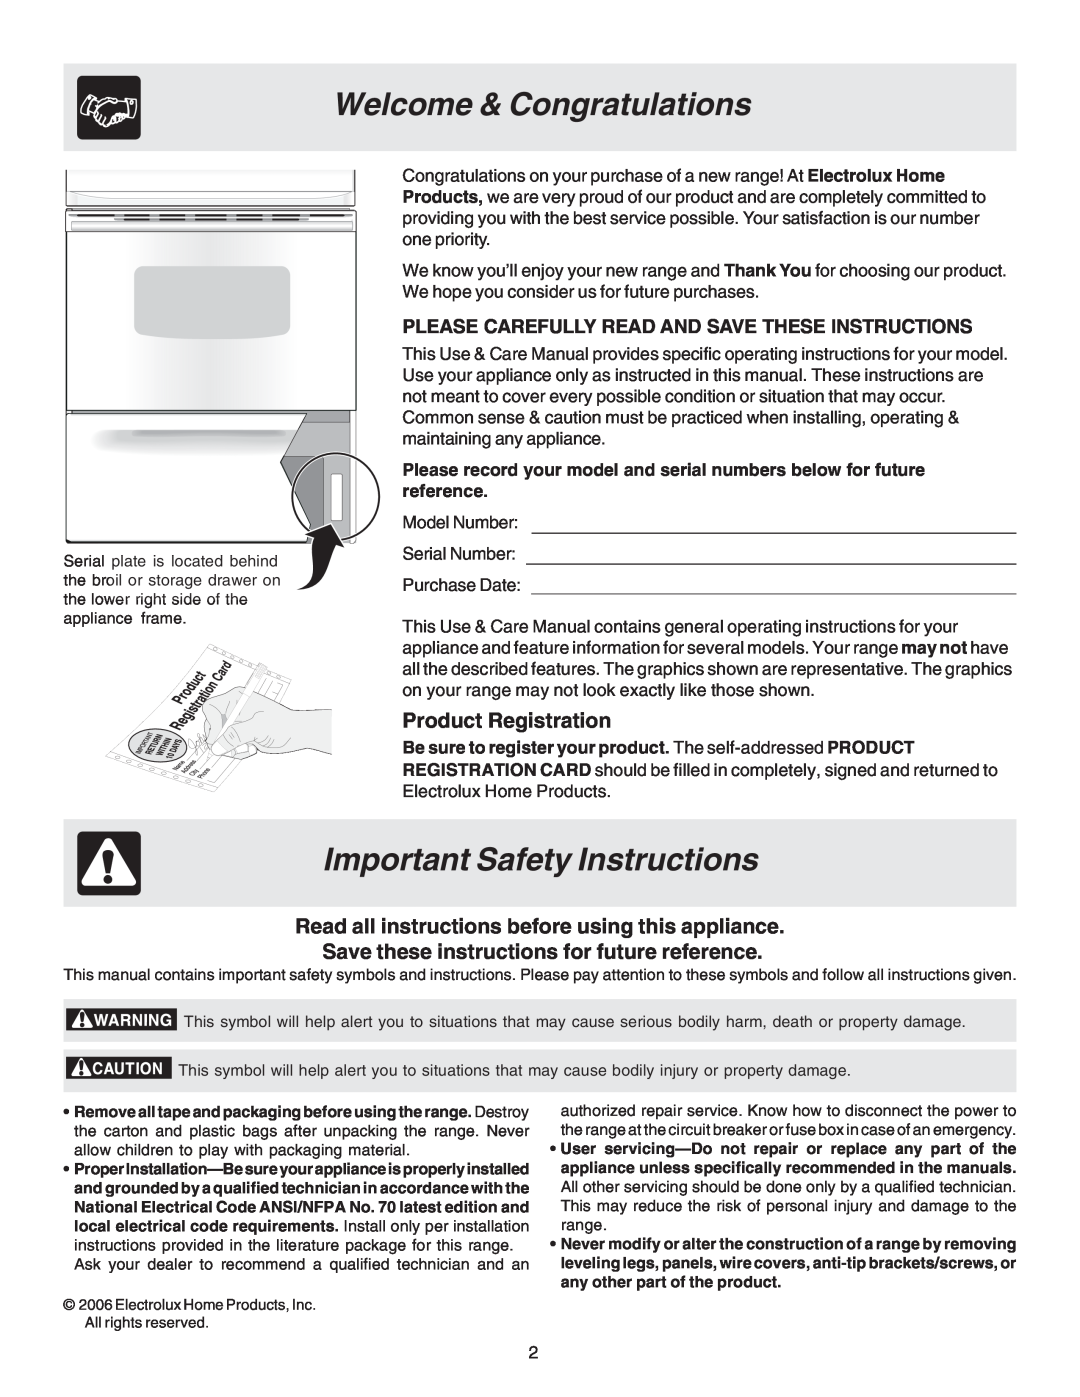 Frigidaire 316417024 Welcome & Congratulations, Important Safety Instructions, Product Registration 